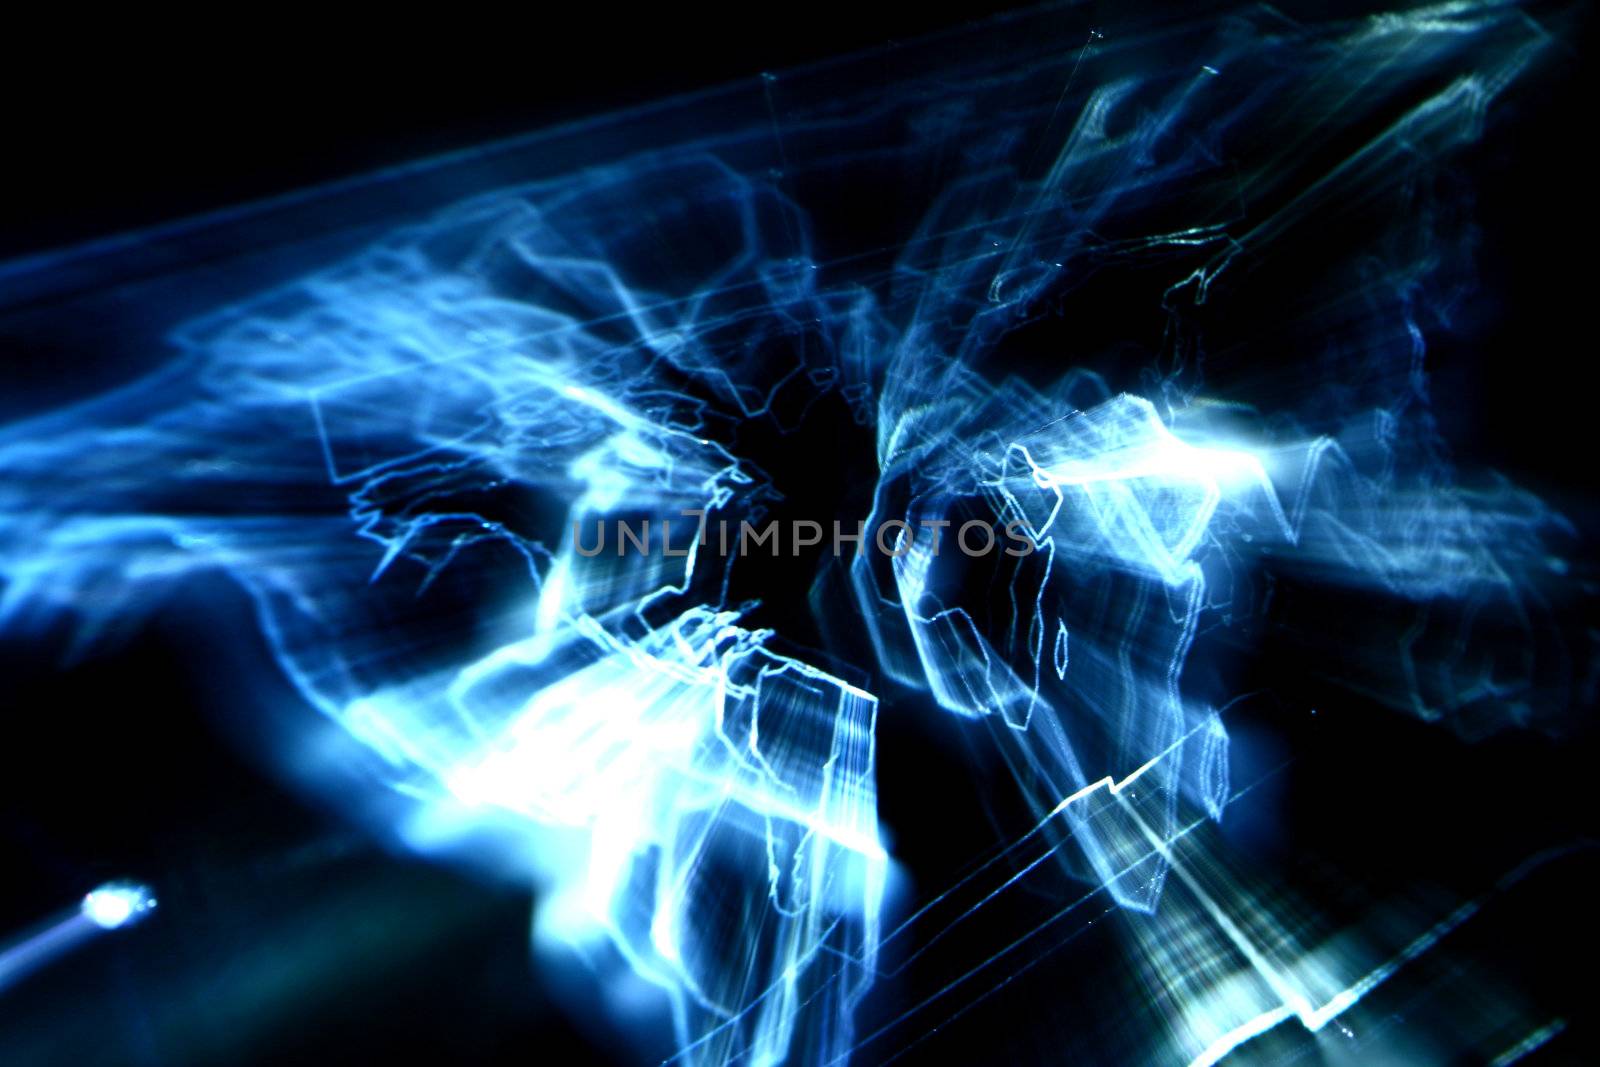 abstract map glow close up background